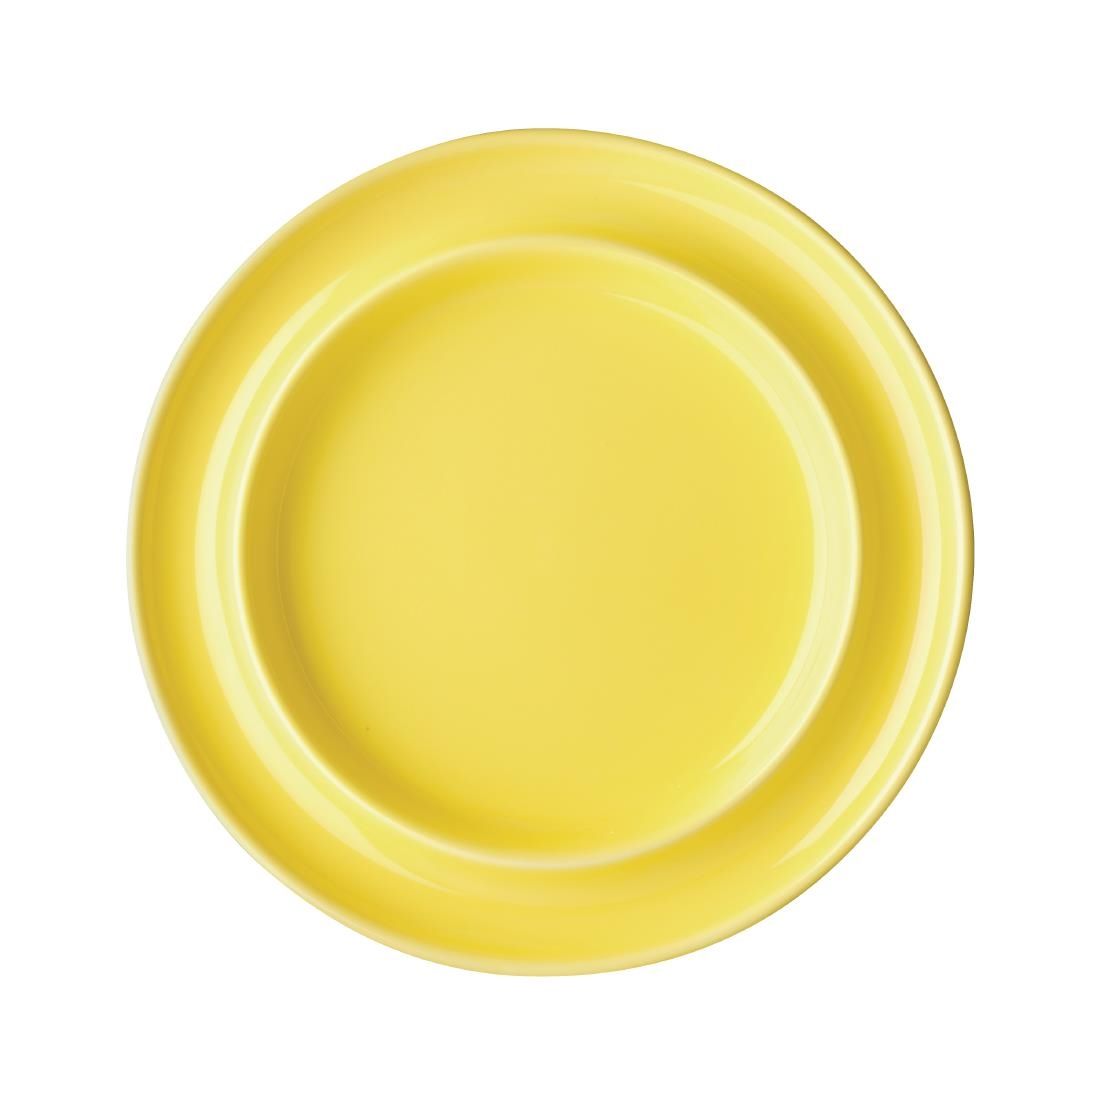 DW146 Olympia Heritage Raised Rim Plates Yellow 203mm (Pack of 4)